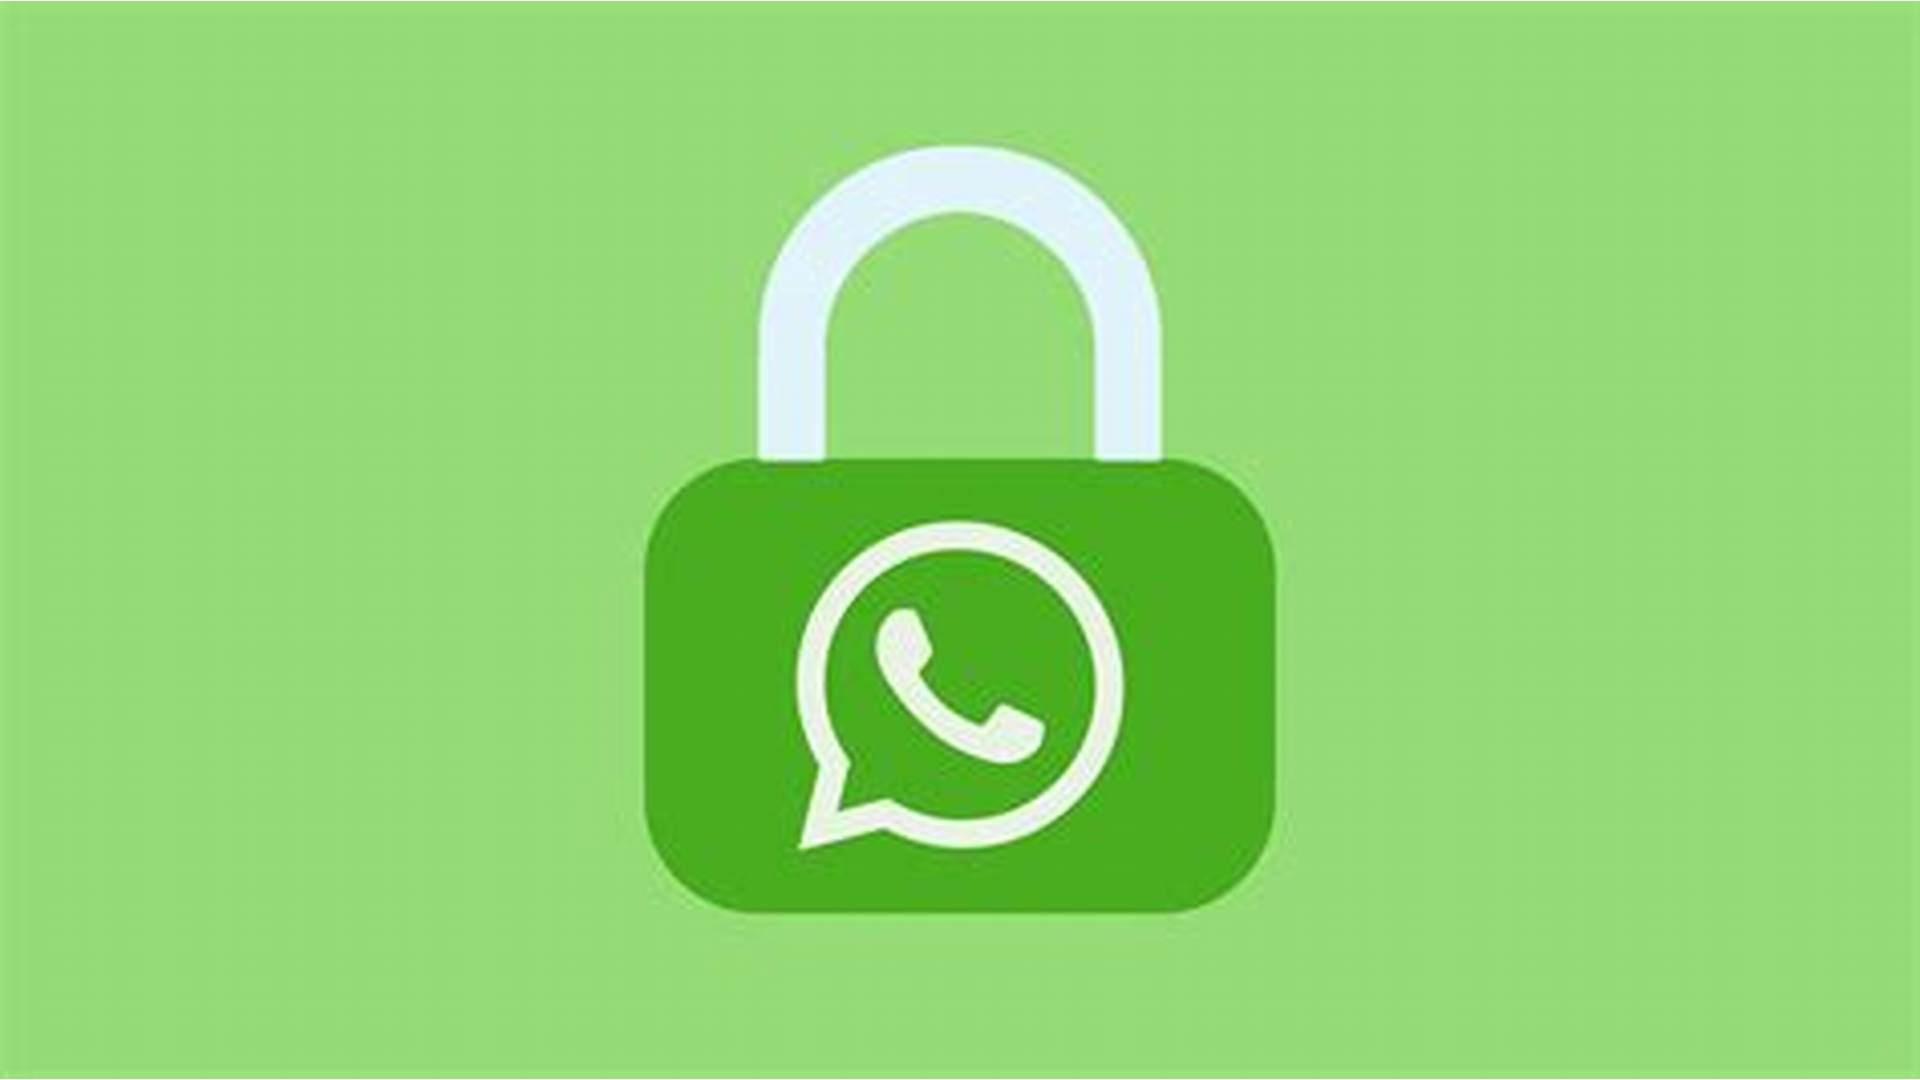 How to secure your WhatsApp account from social hacking